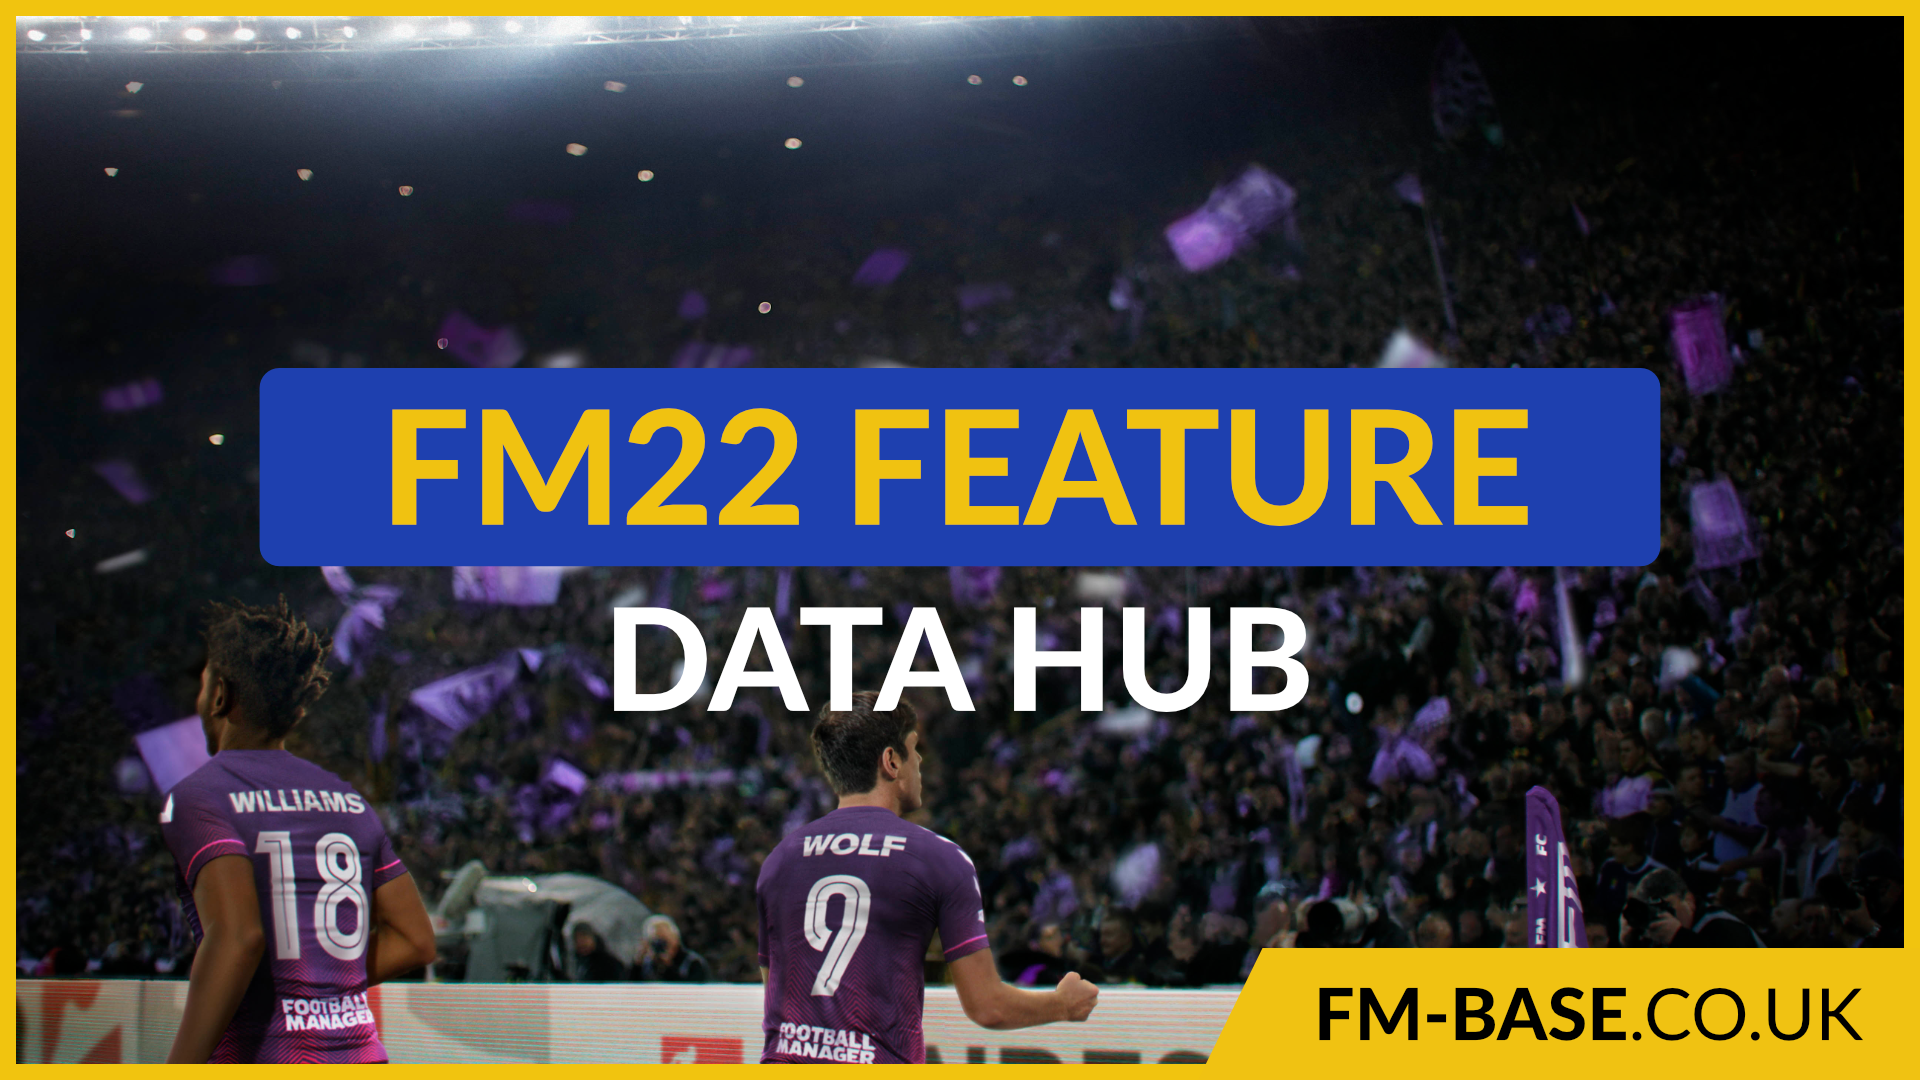 The Data Hub looks set to be an exciting addition to FM22